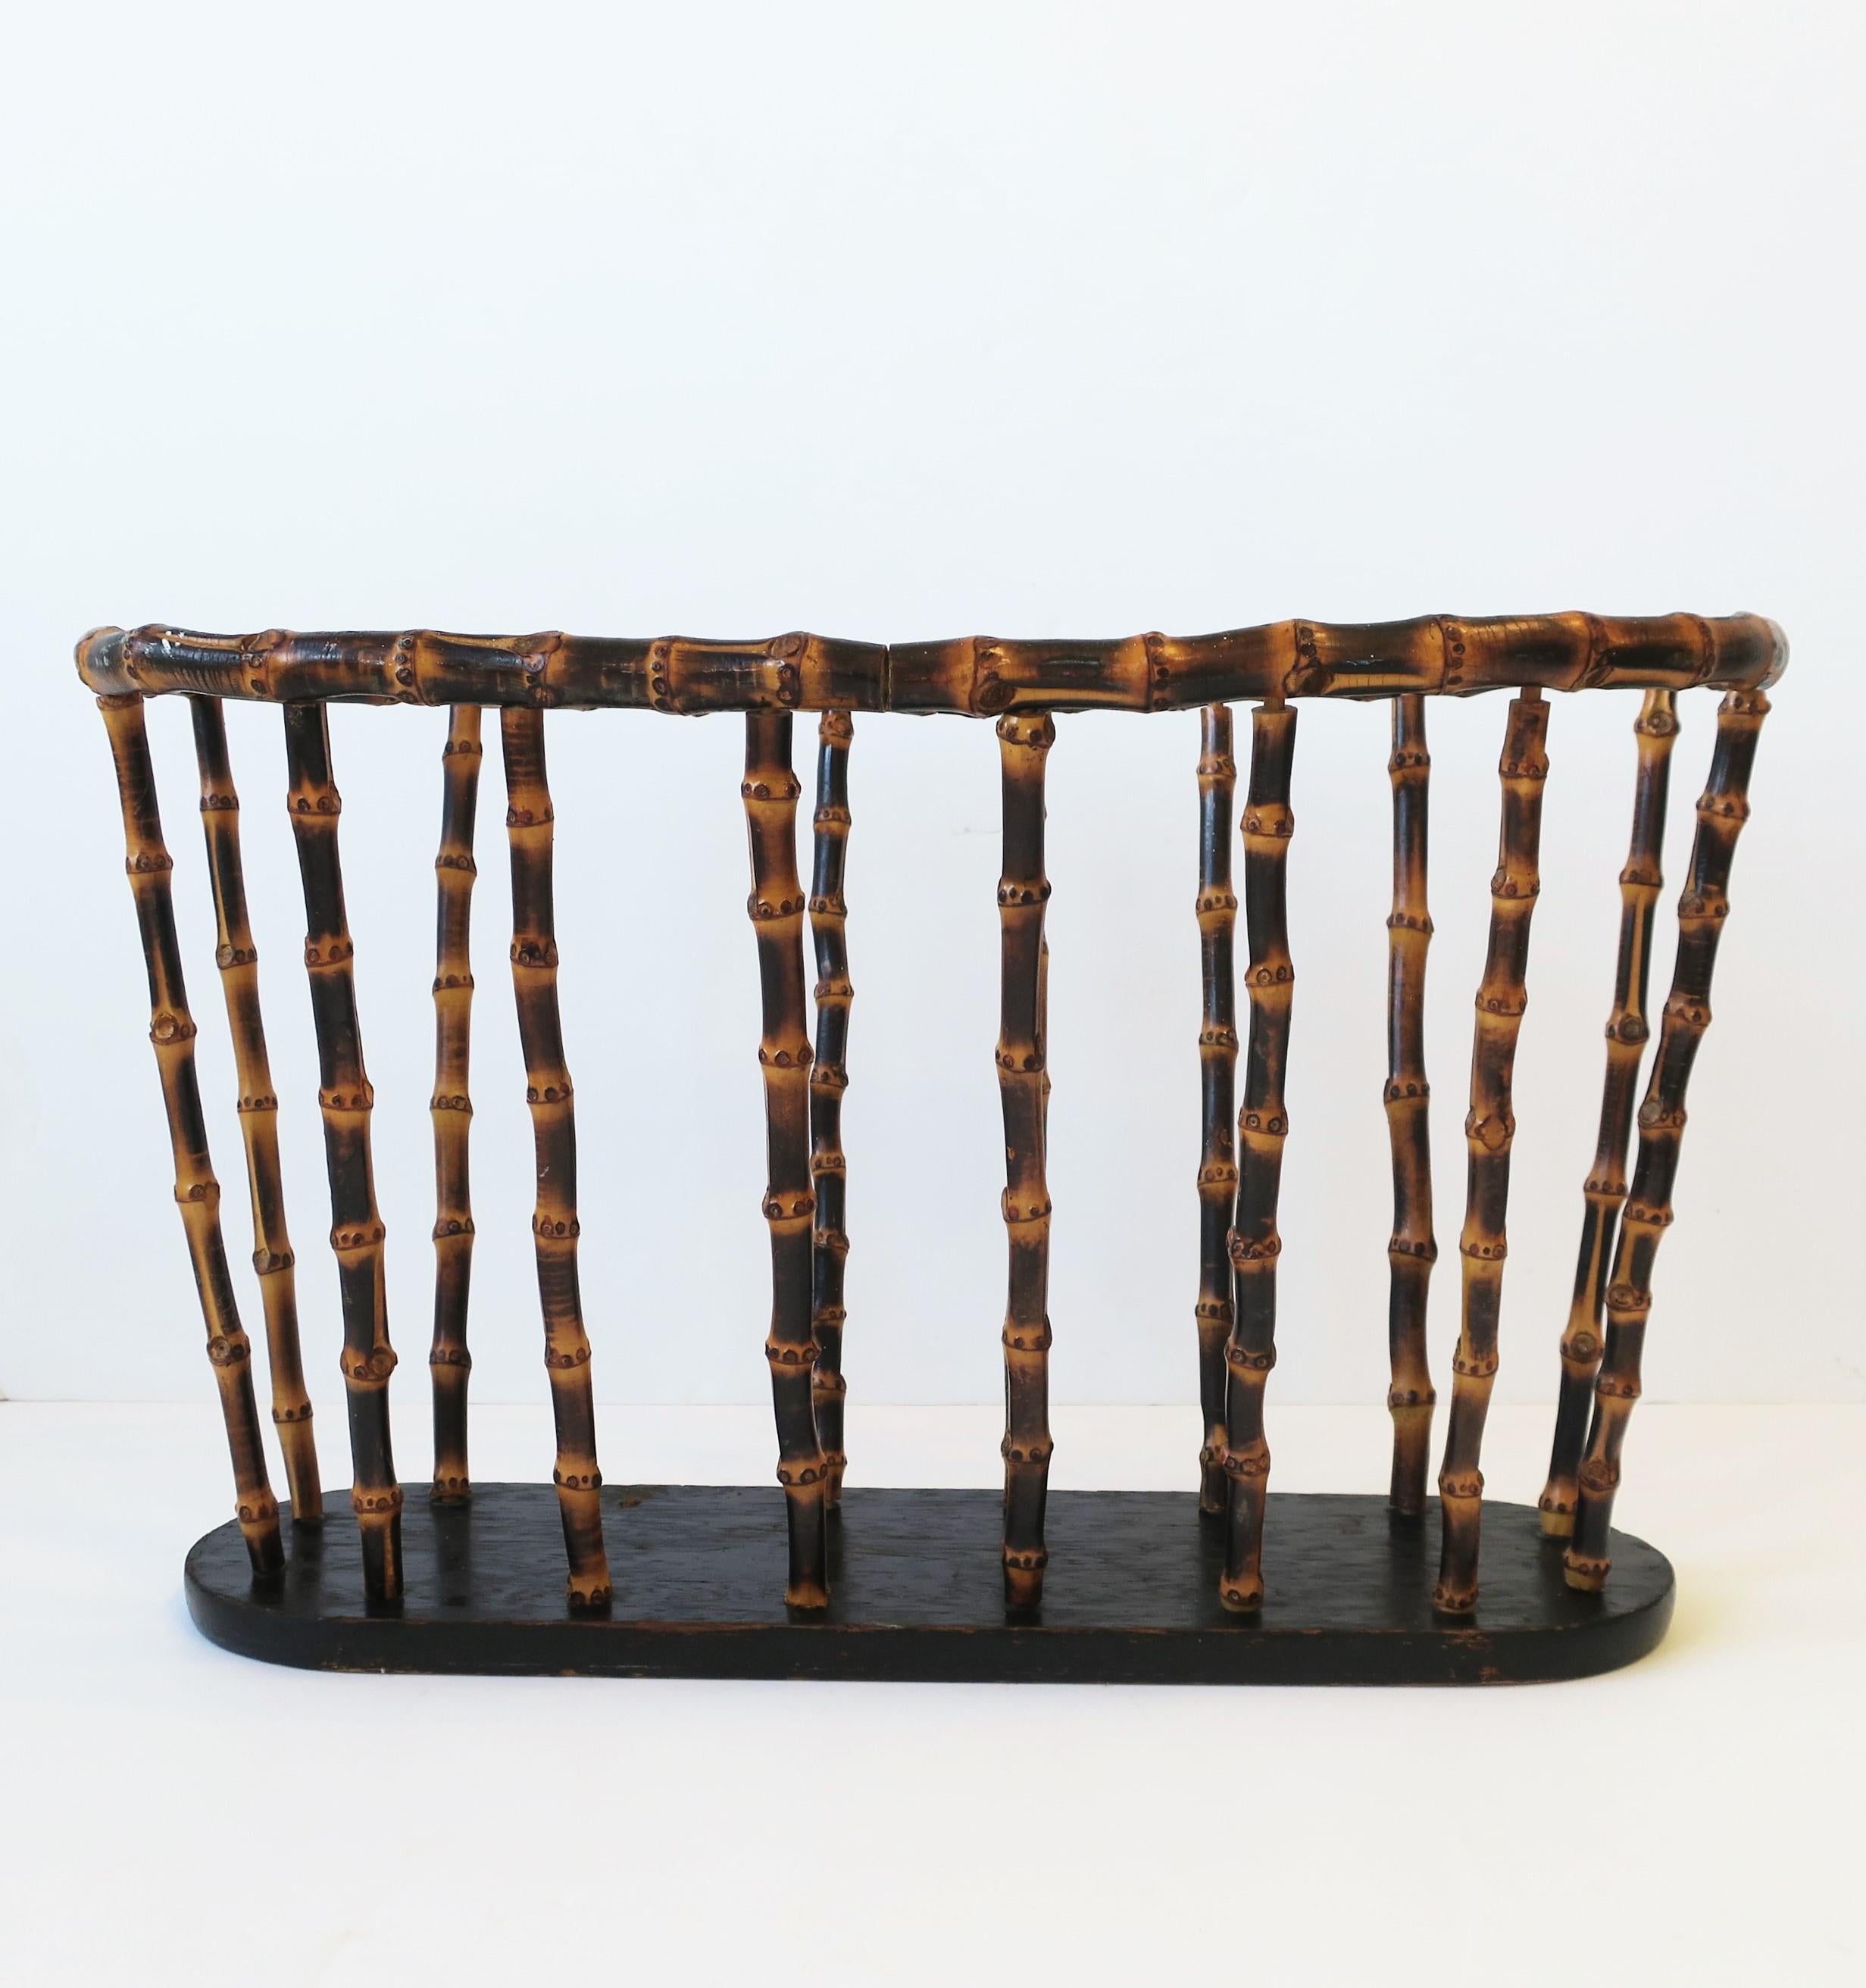 Painted Bamboo Magazine or Newspaper Holder Stand Rack Basket in the style of Gucci